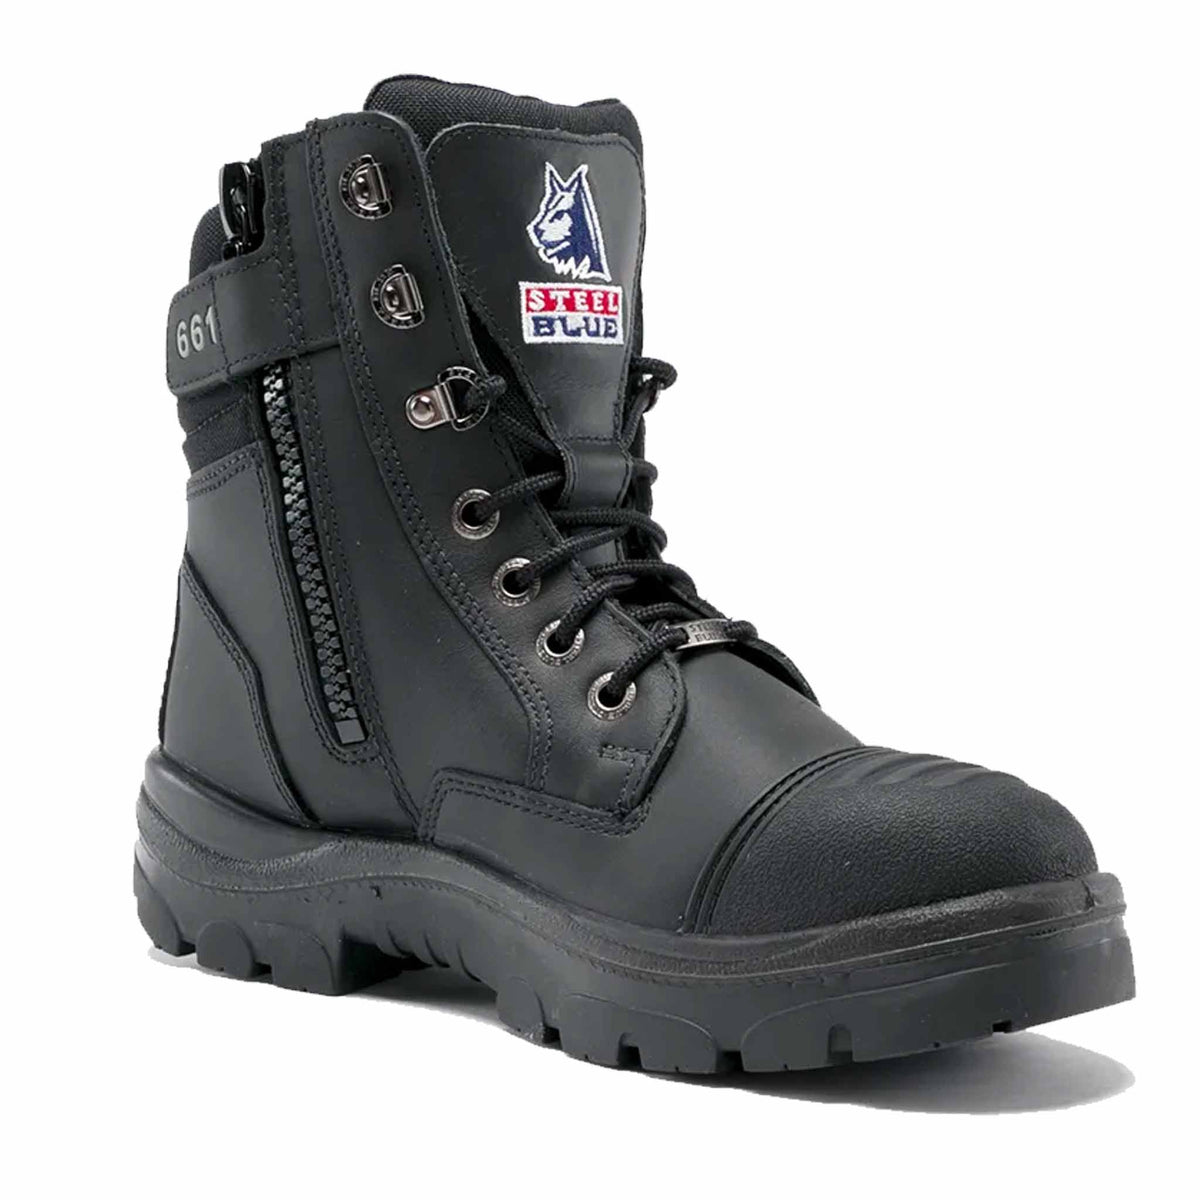 black southern cross zip safety boot